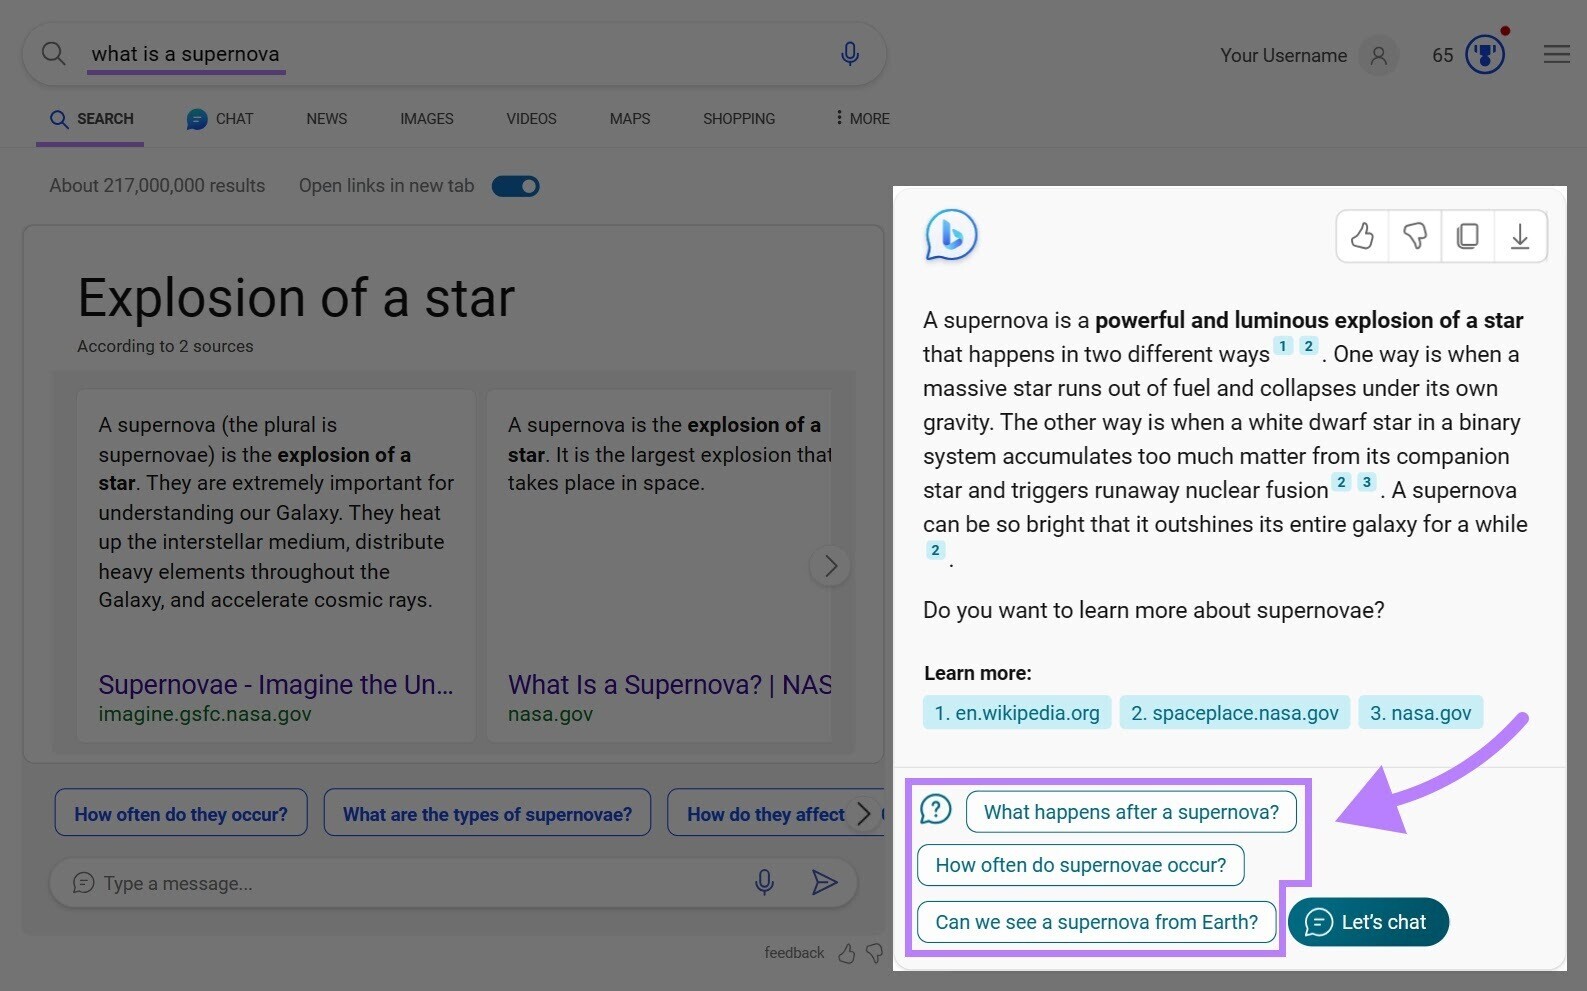 an example of follow-up questions in Bing Chat SERP feature for "what is a supernova" query